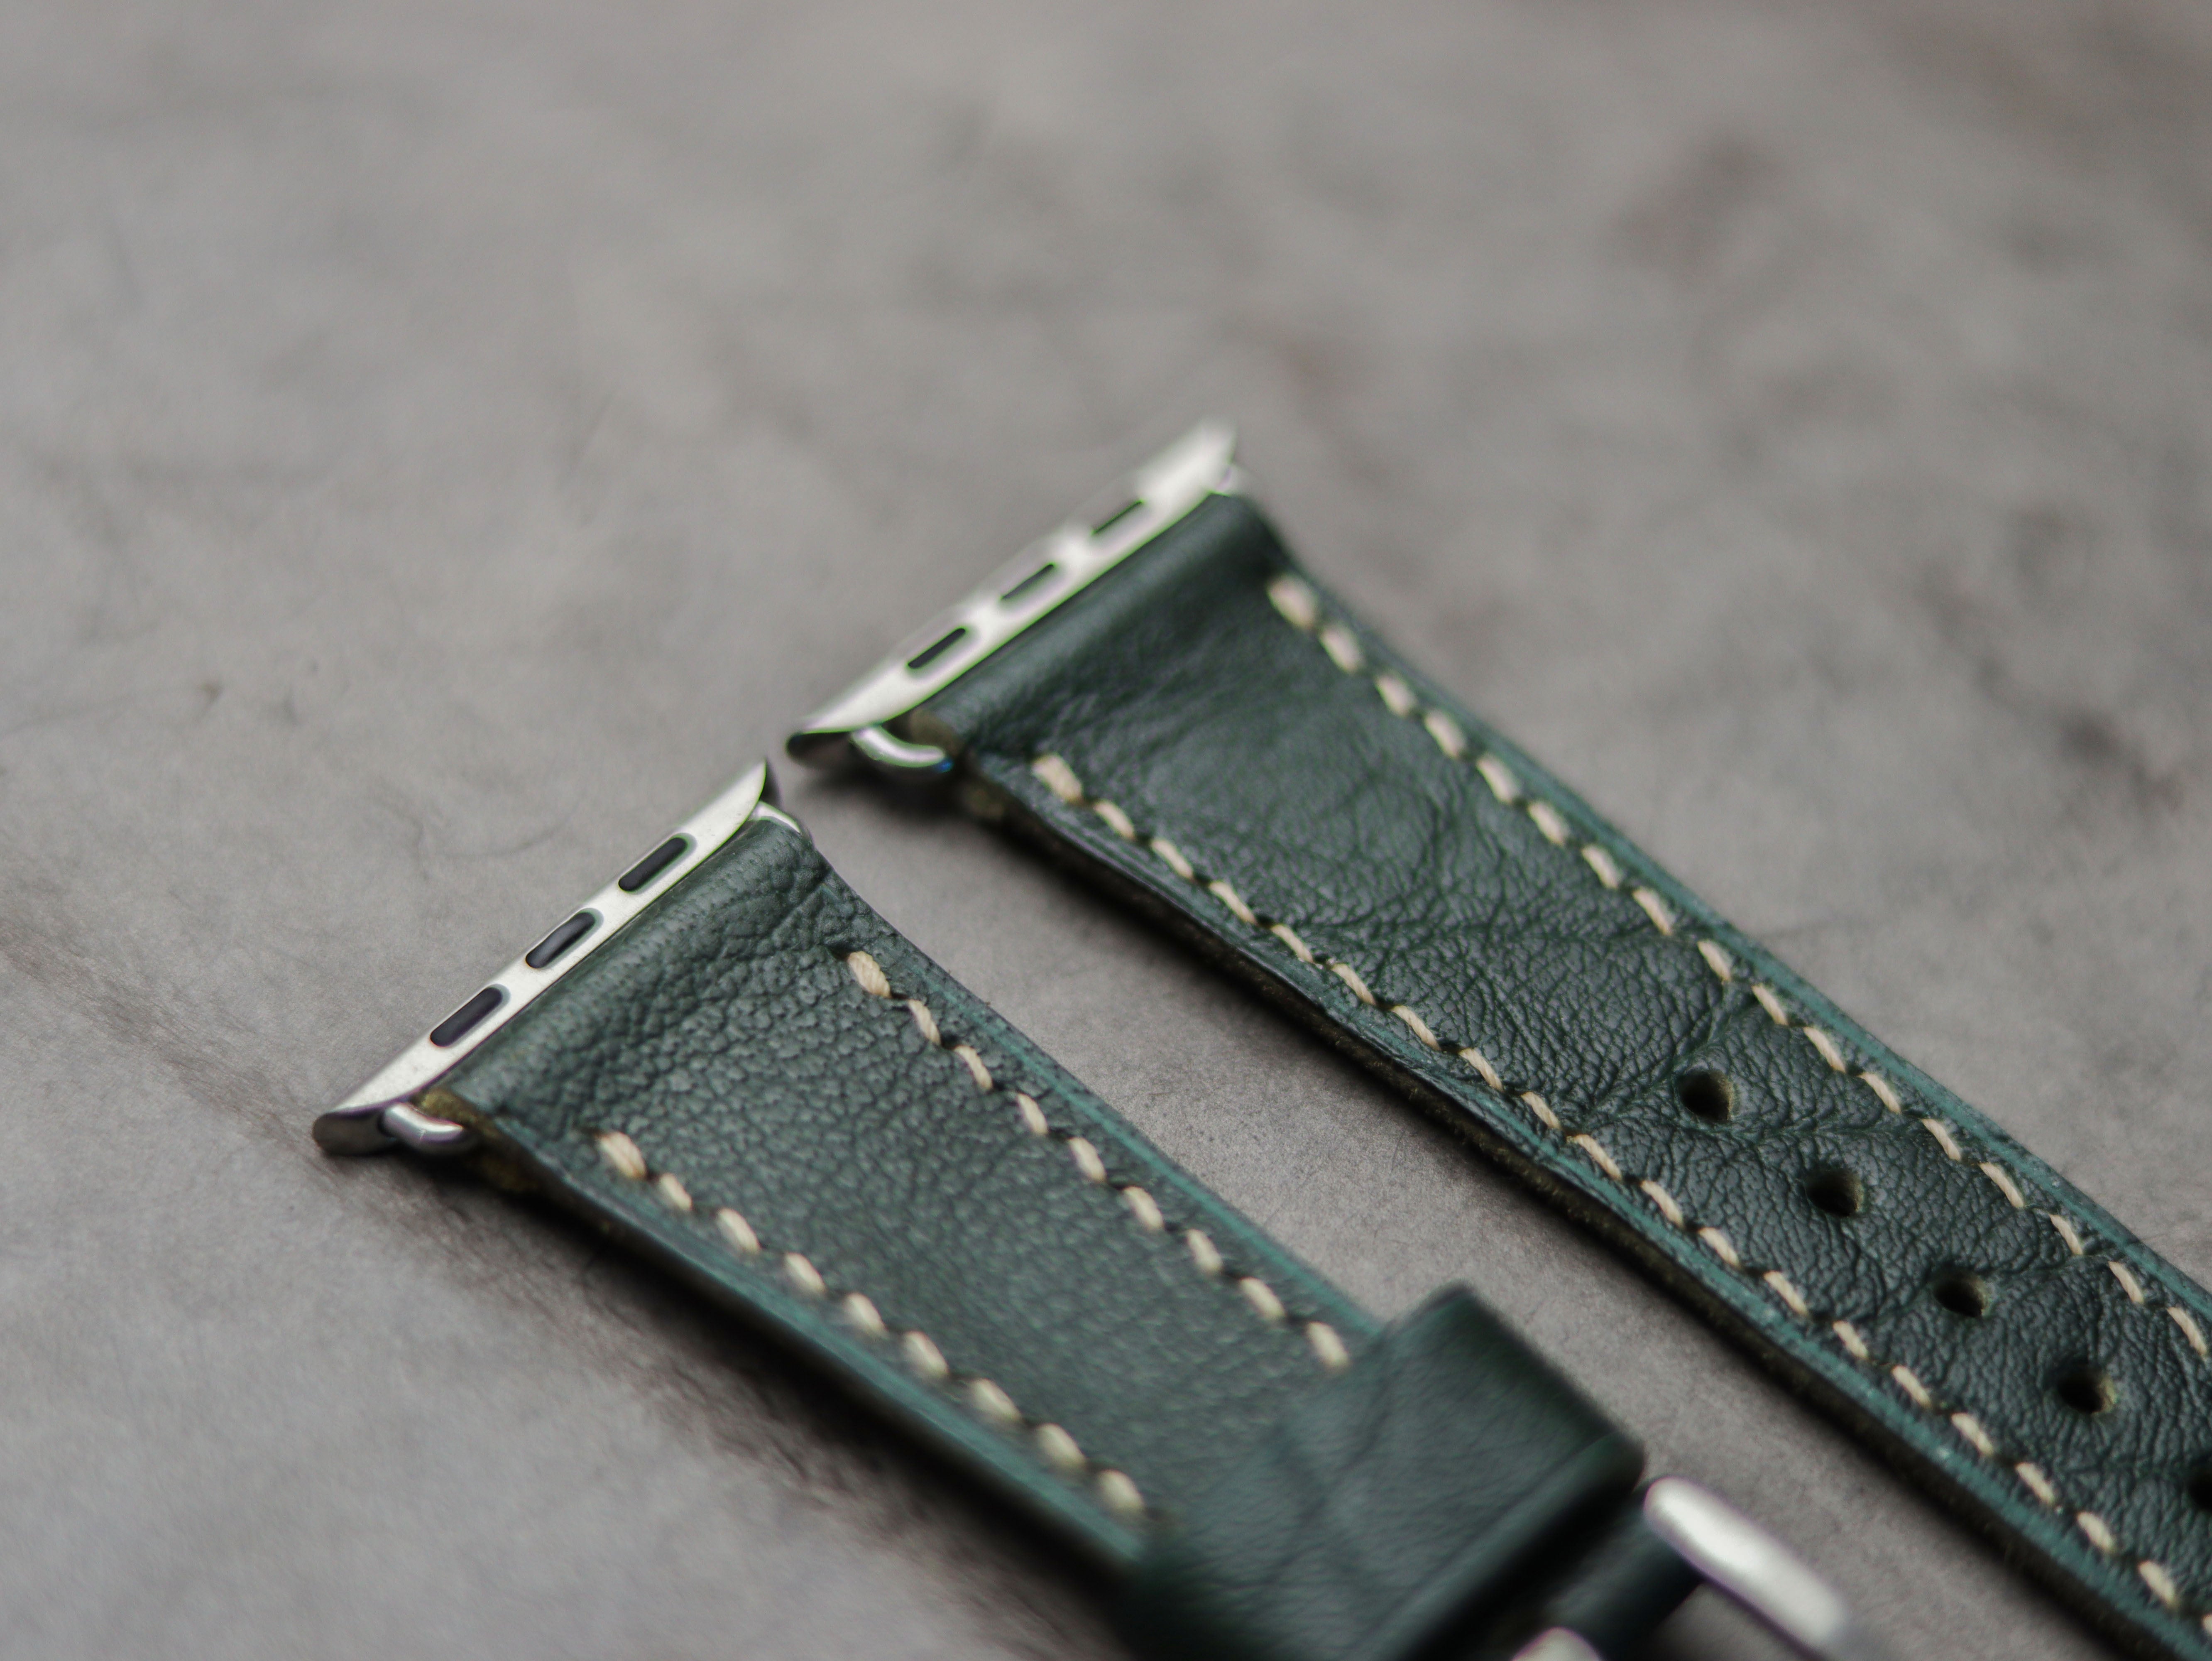 PINE GREEN LEATHER - APPLE WATCH STRAPS HAND-CRAFTED